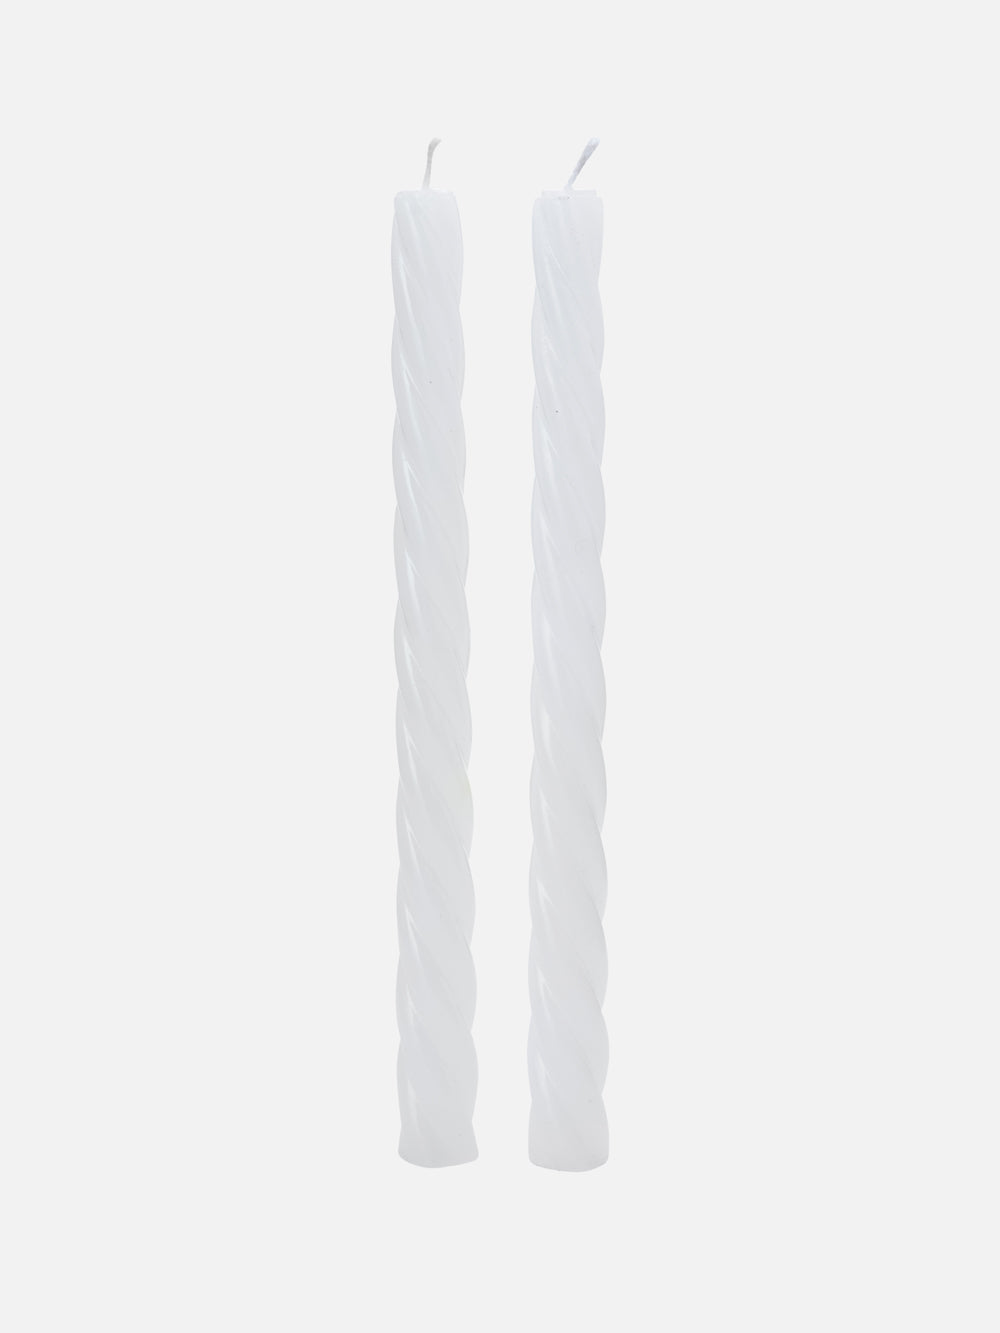 Pearl Spiral Candle, Set of 2